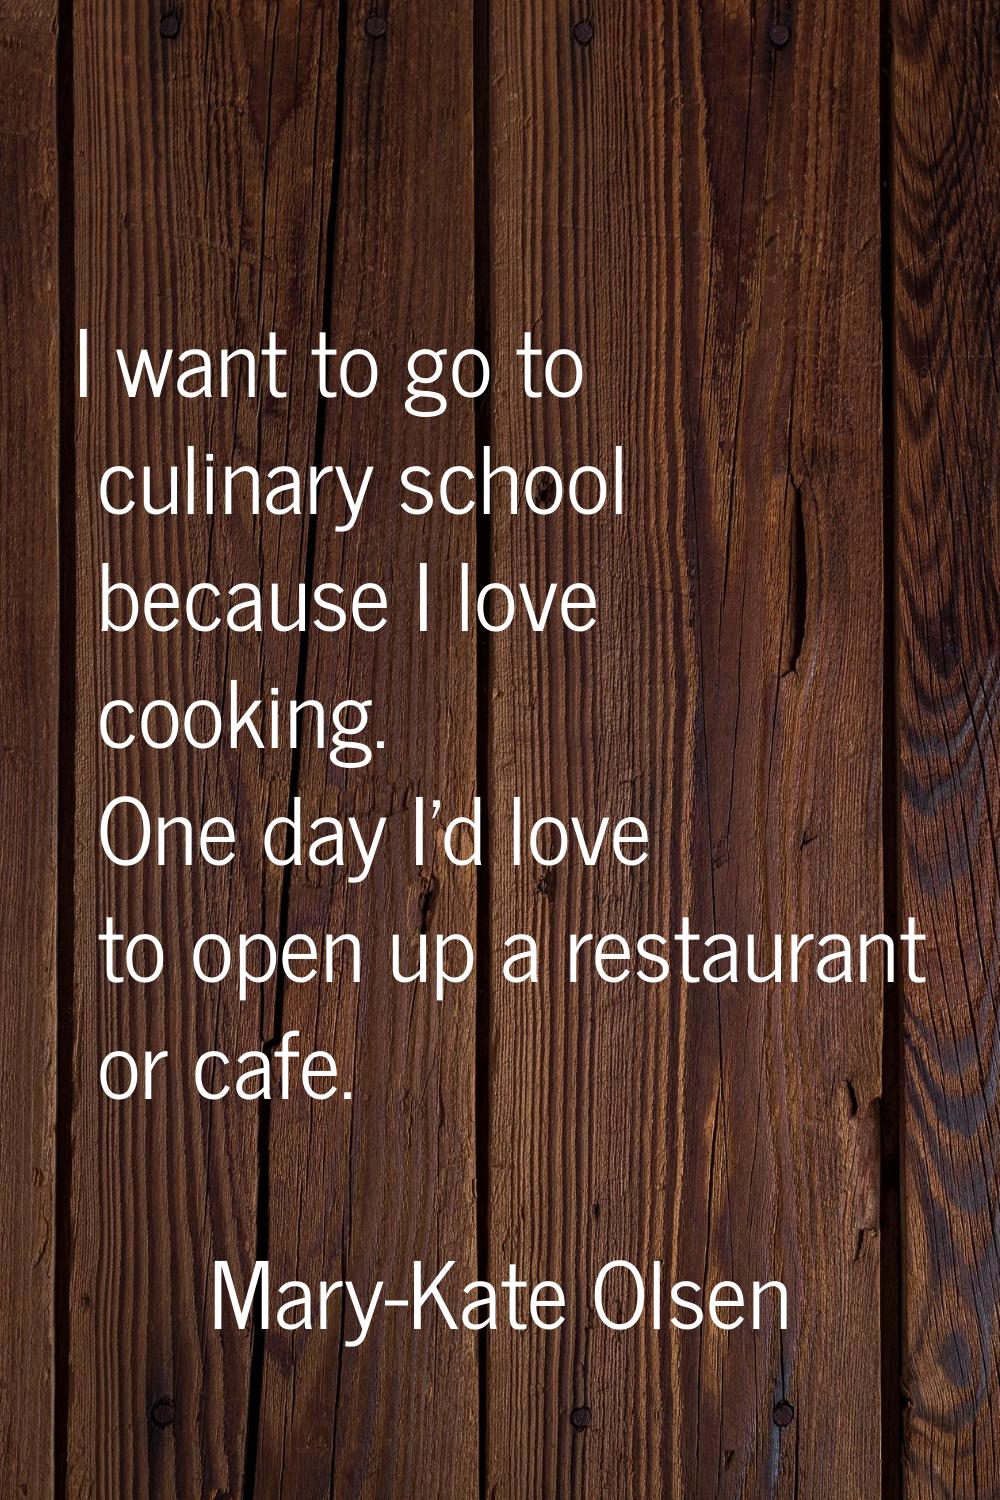 I want to go to culinary school because I love cooking. One day I'd love to open up a restaurant or